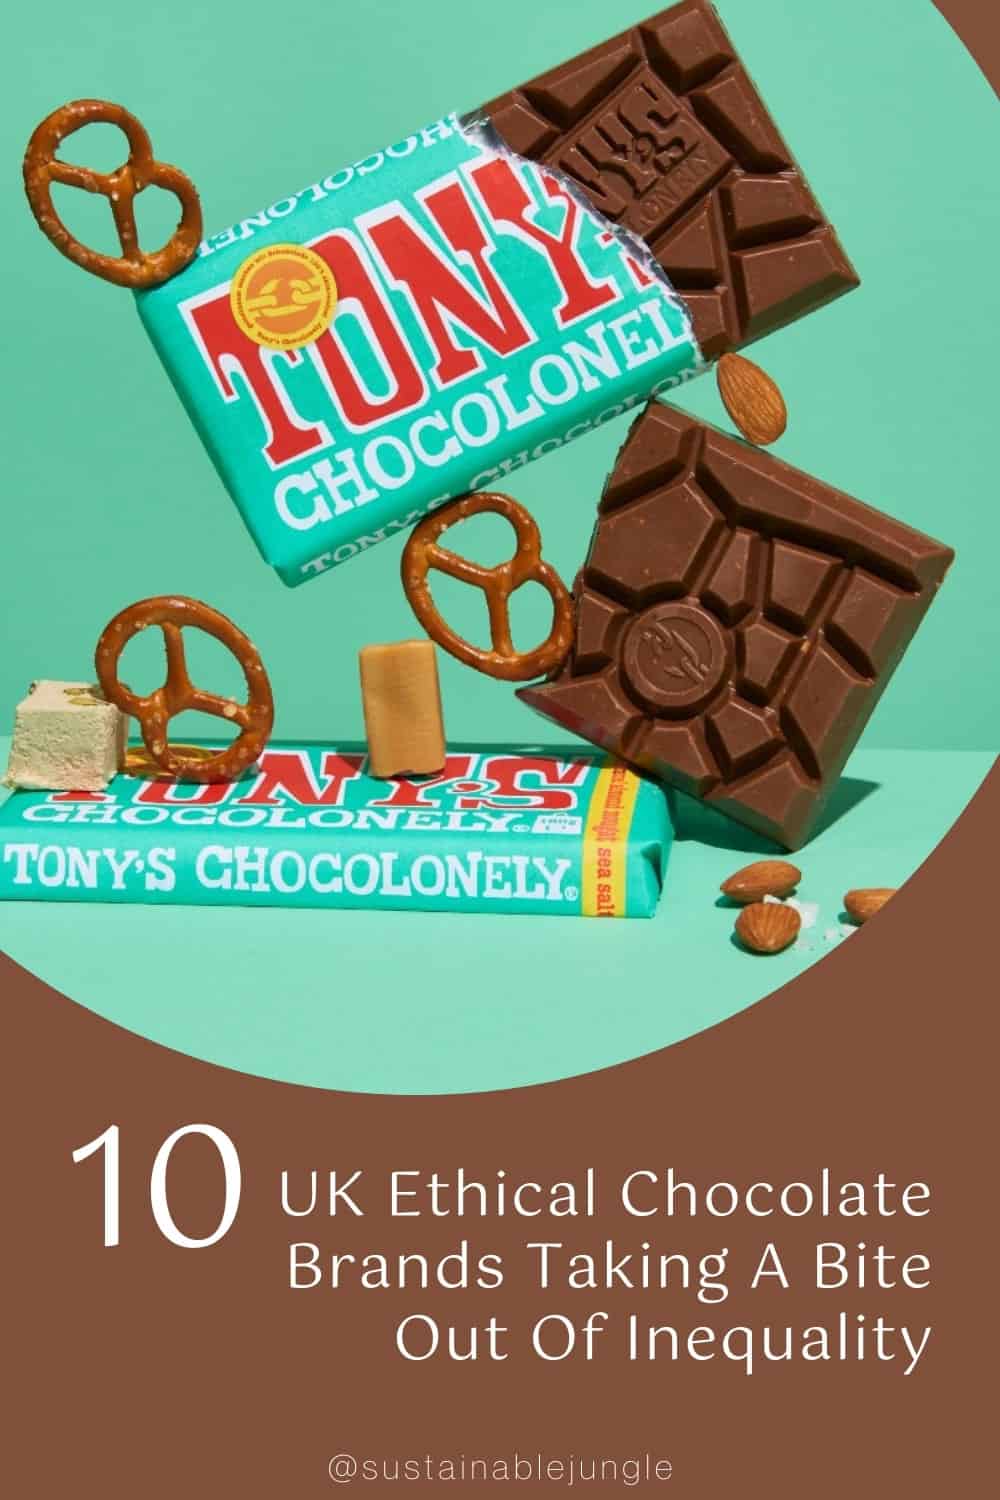 10 UK Ethical Chocolate Brands Taking A Bite Out Of Inequality #ethicalchocolateUK #mostethicalchocolateUK #ethicalveganchocolateUK #ethicalchocolatecompaniesUK #ethicalchocolatebrandsUK #bestethicalchocolateUK #sustainablechocolate #sustainablechocolatebrands #sustainablechocolatepackaging #sustainablechocolatebars #sustainablechocolateUK #fairtradechocolate #ecofriendlychocolate #sustainablejungle Image by Tony's Chocolonely